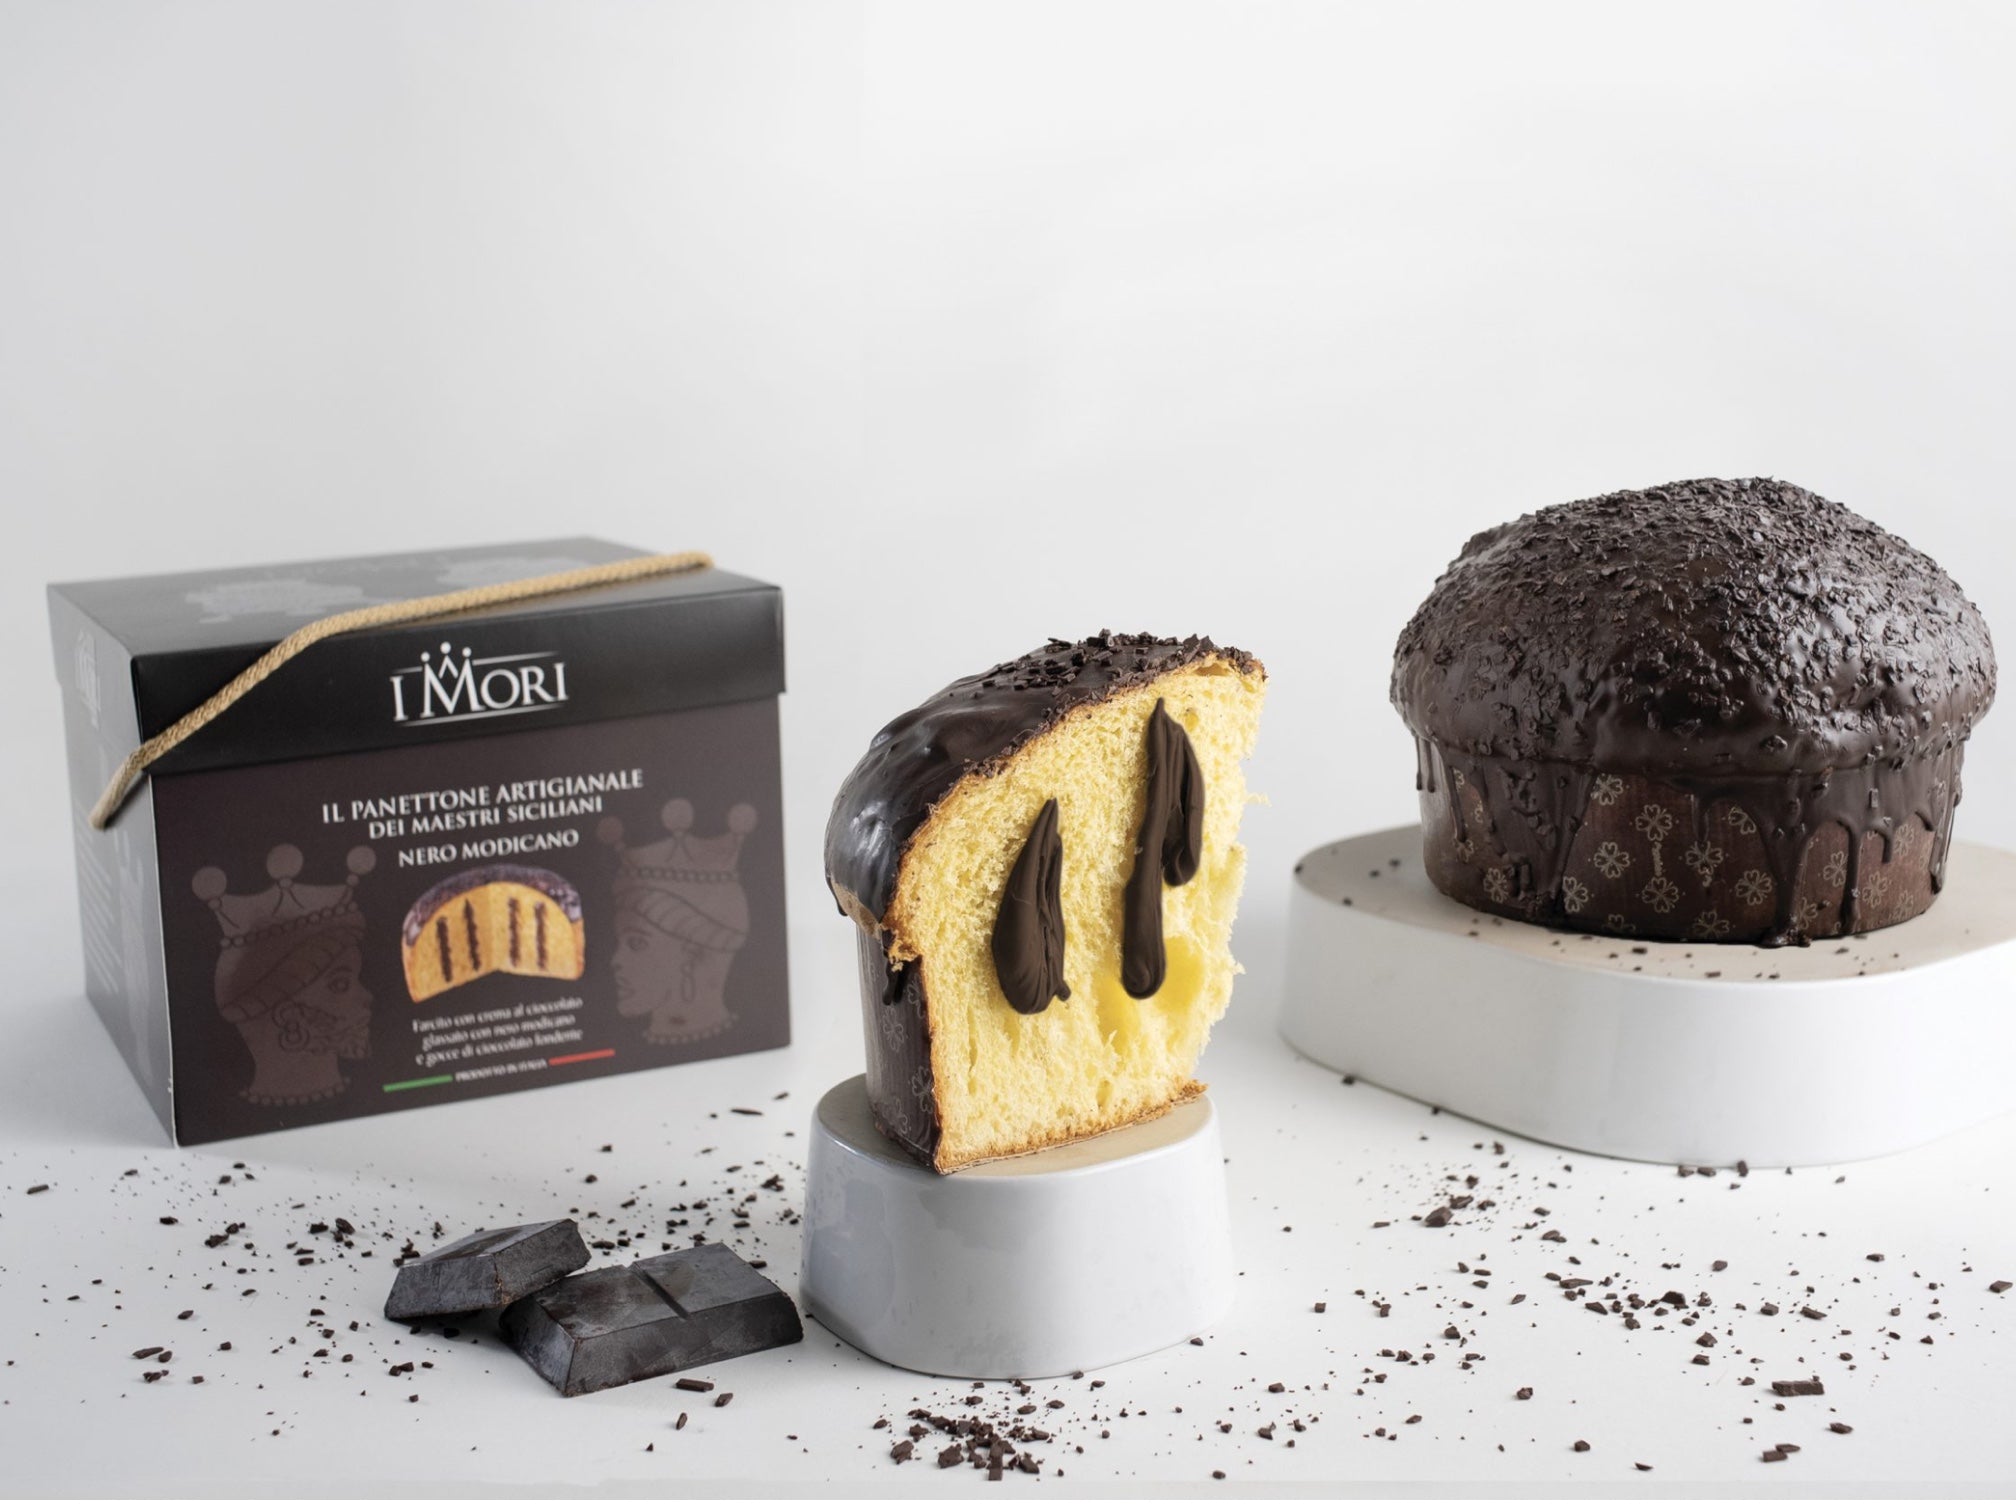 Artisanal Panettone With Chocolate Cream & Covered With Chocolate 900g By I Mori 900g